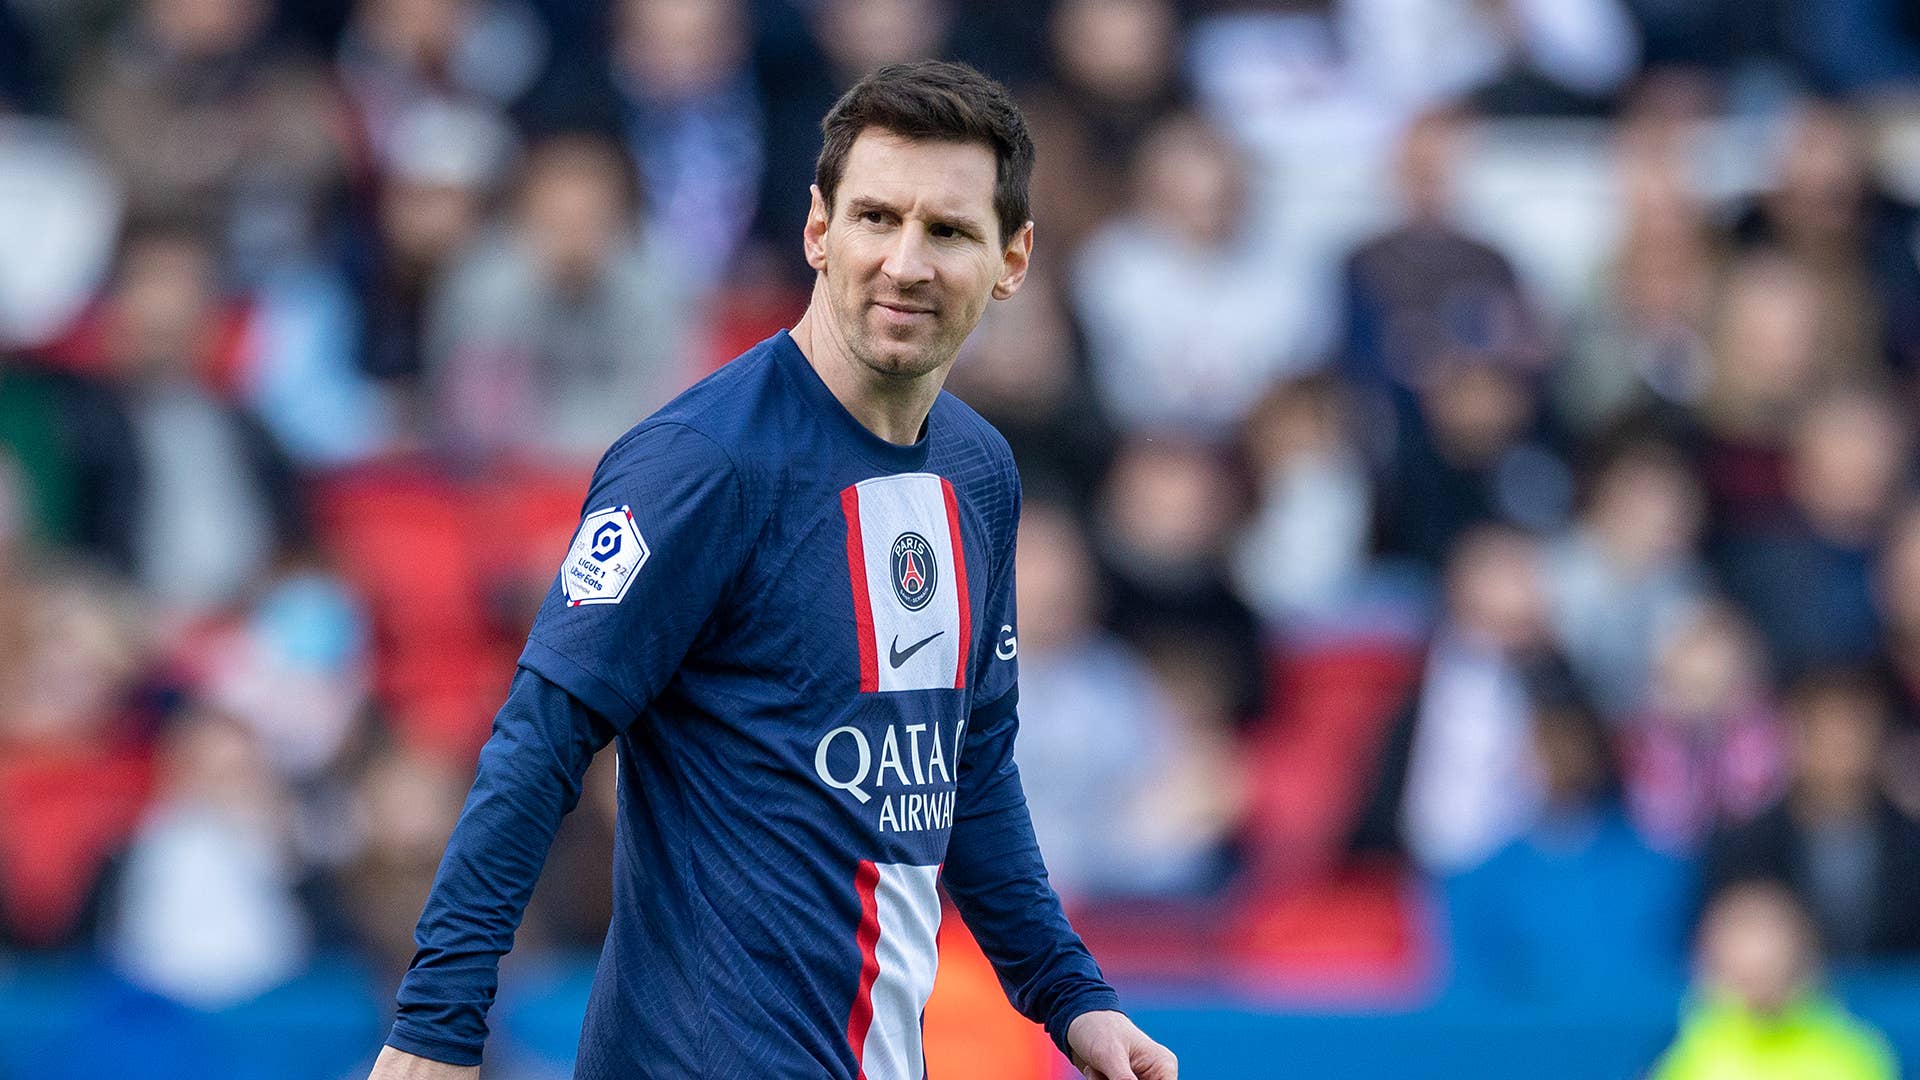 Lionel Messi during a game between Paris Saint Germain and Lille OSC in February, 2023